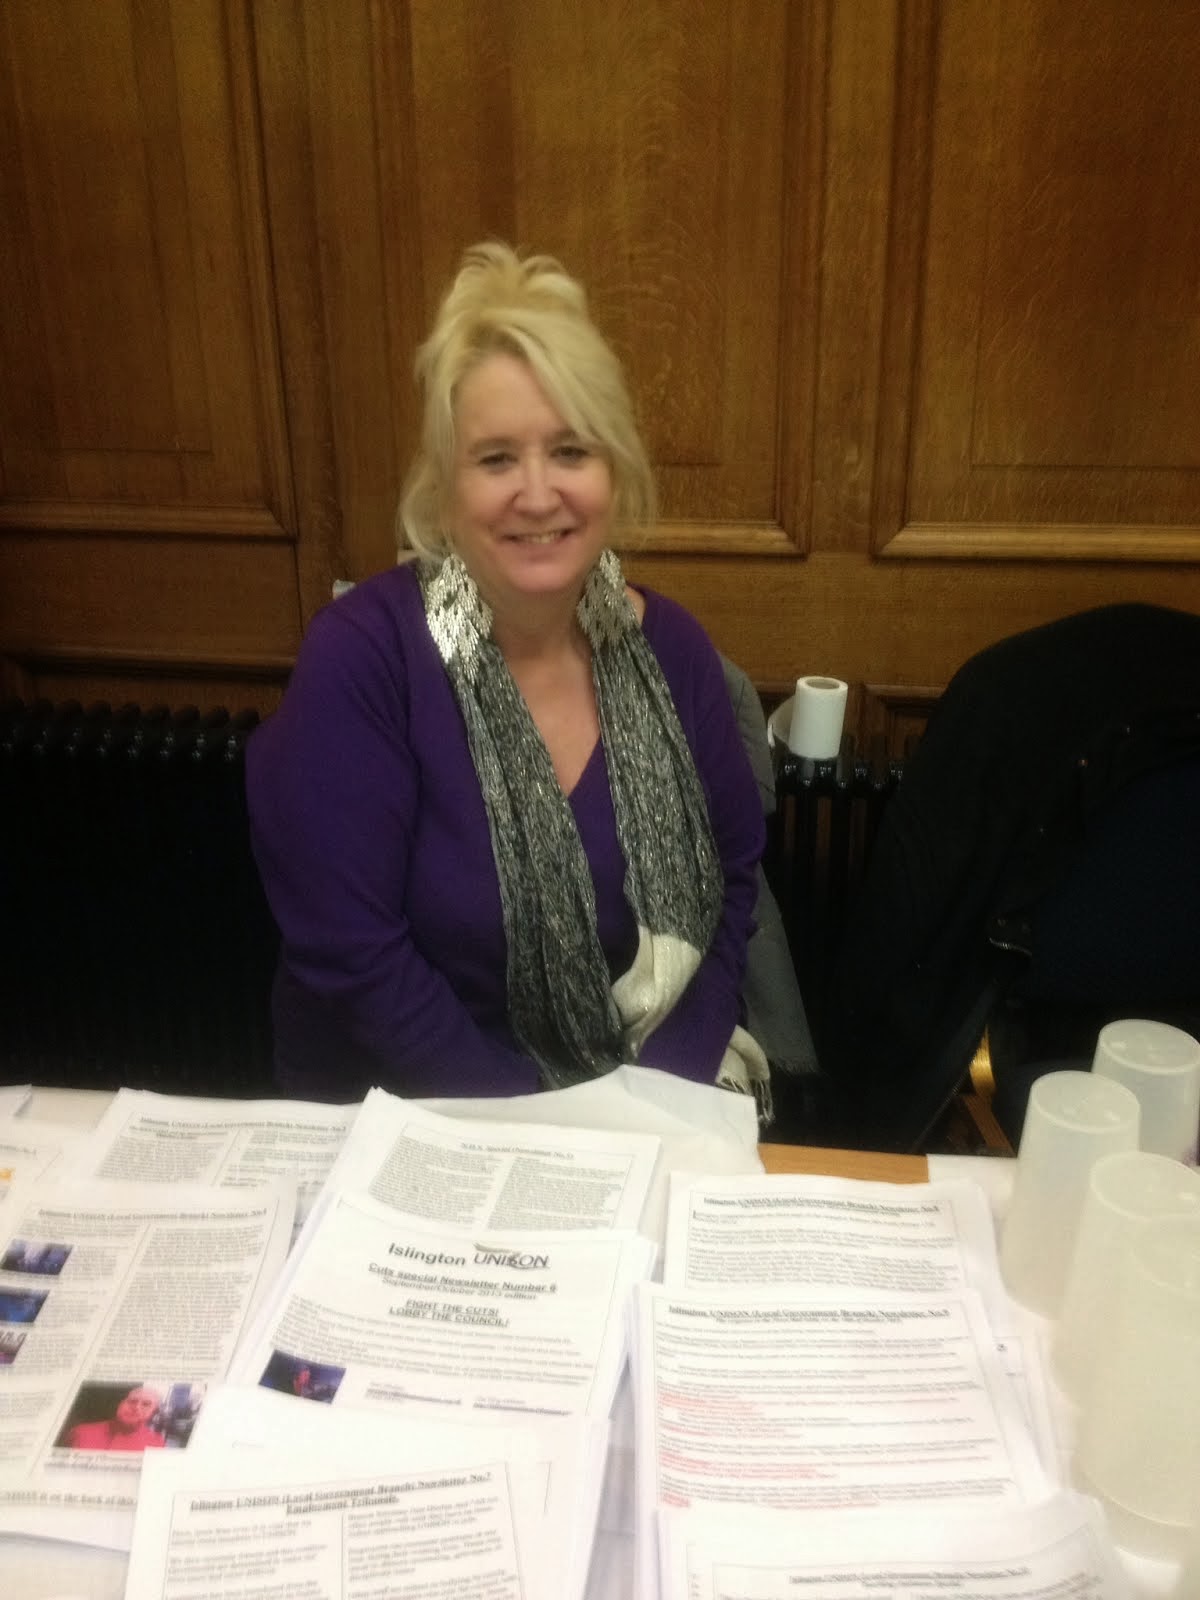 Jane at the International day of the disabled